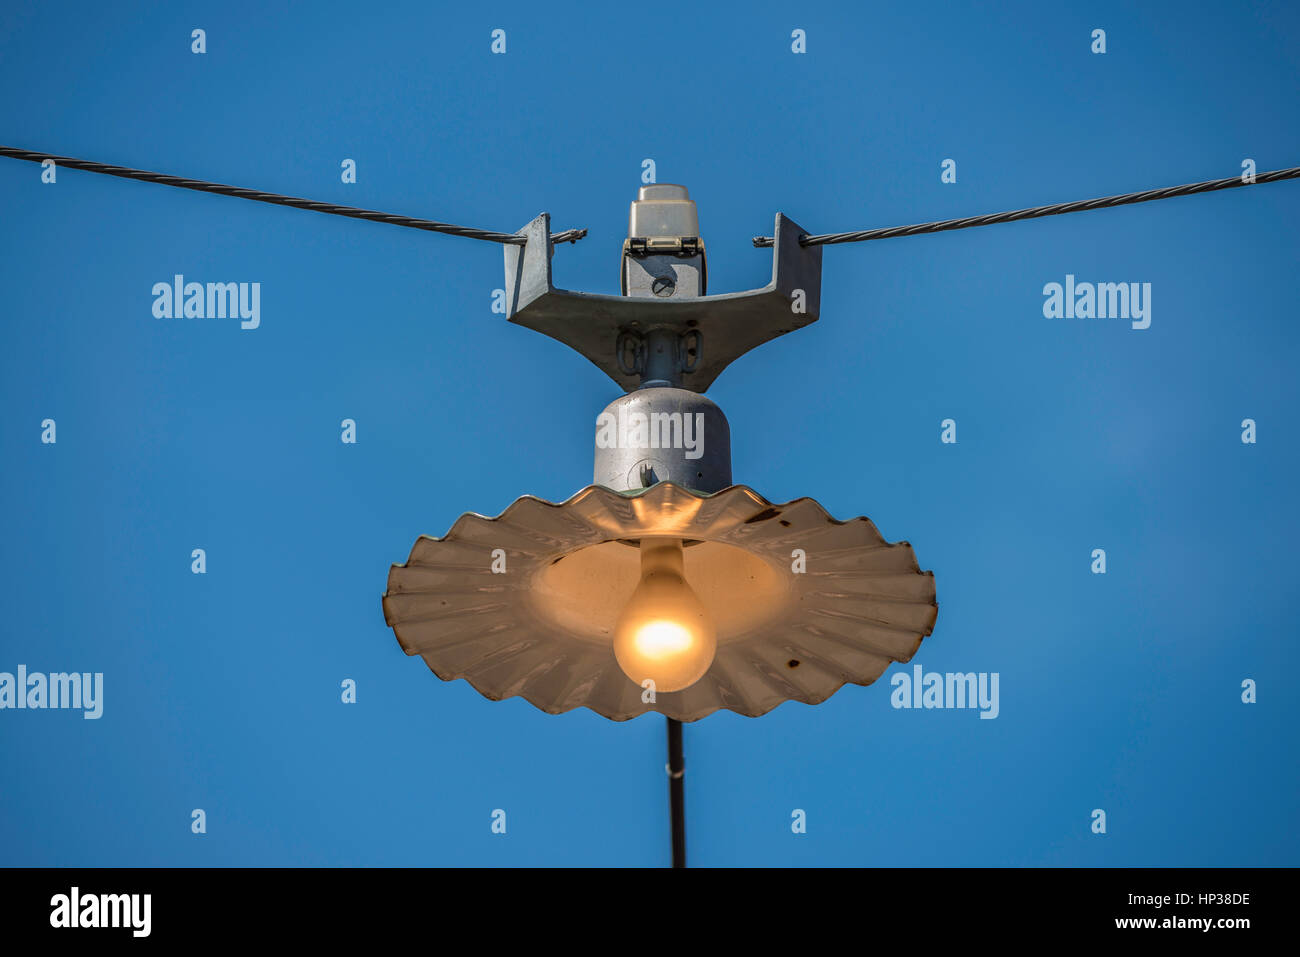 Suspended Outdoor Pendant Light against Blue Sky Stock Photo